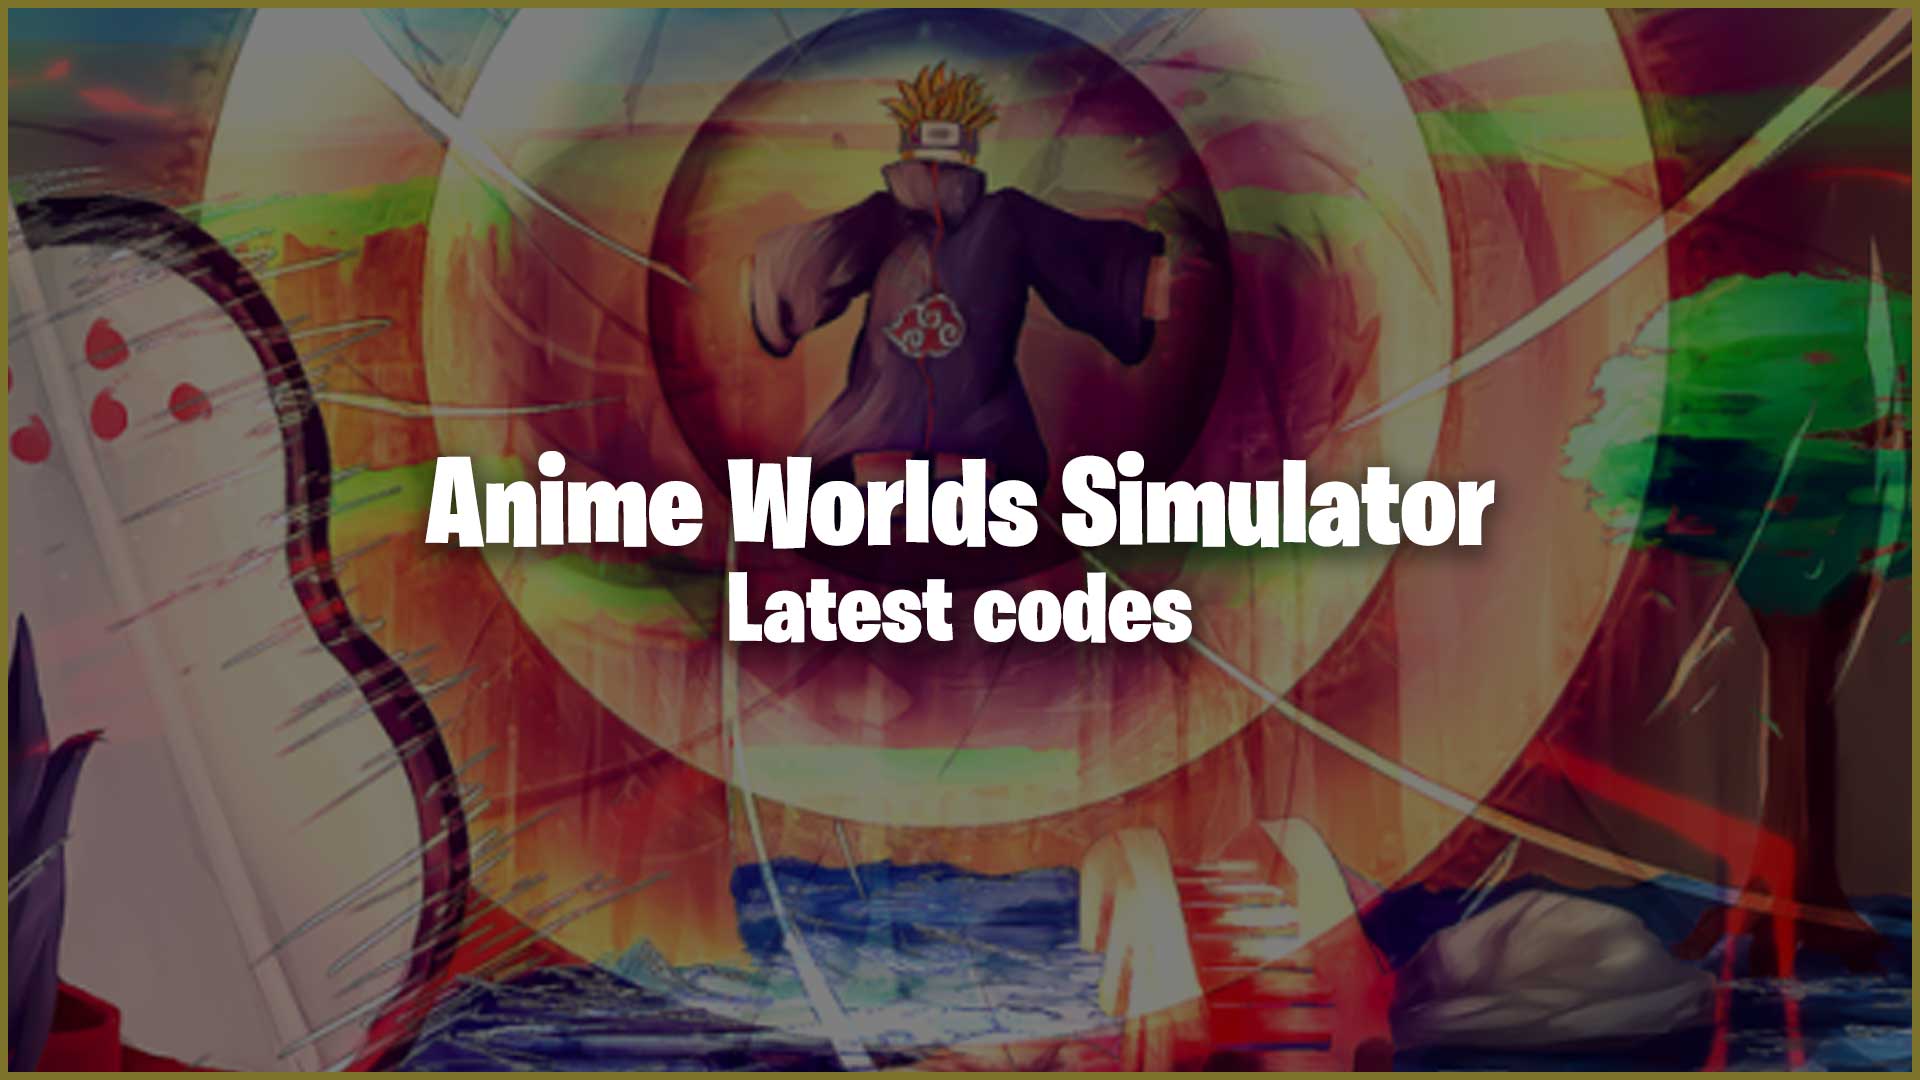 2021 ANIME WORLDS SIMULATOR CODES FREE COINS ALL NEW SECRET ROBLOX ANIME  WORLDS SIMULATOR CODES  YouTube